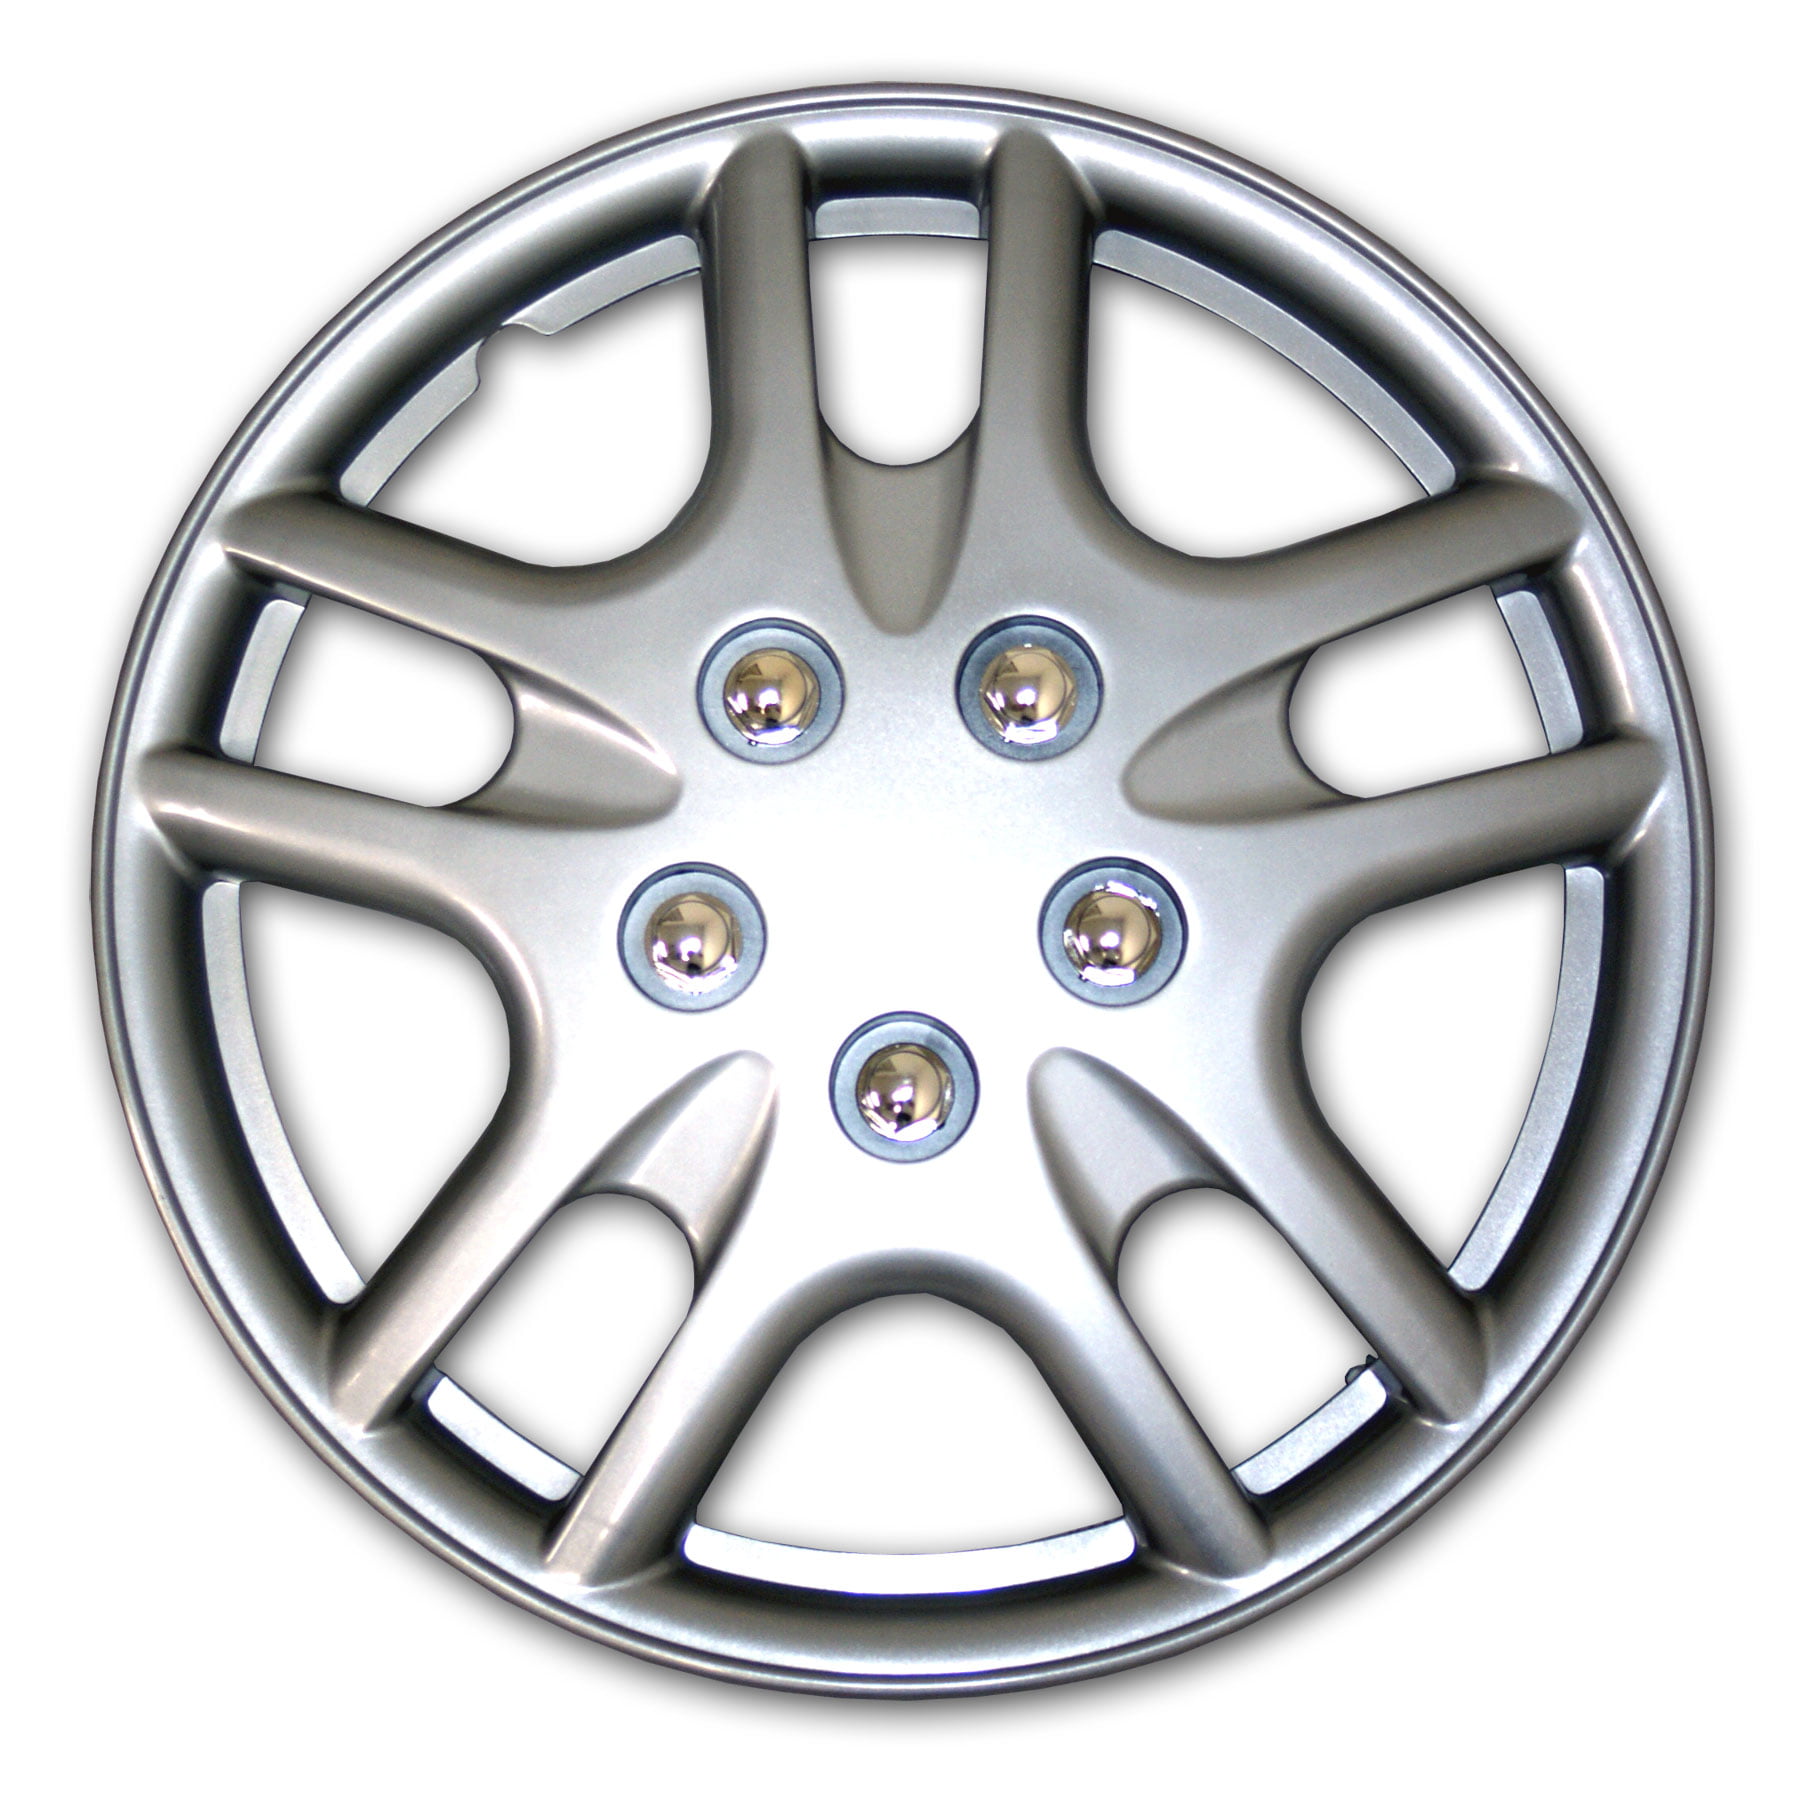 17-Inches Style 616 Snap-On Tuningpros WC3-17-616-S Pack of 4 Hubcaps Type Metallic Silver Wheel Covers Hub-caps Pop-On